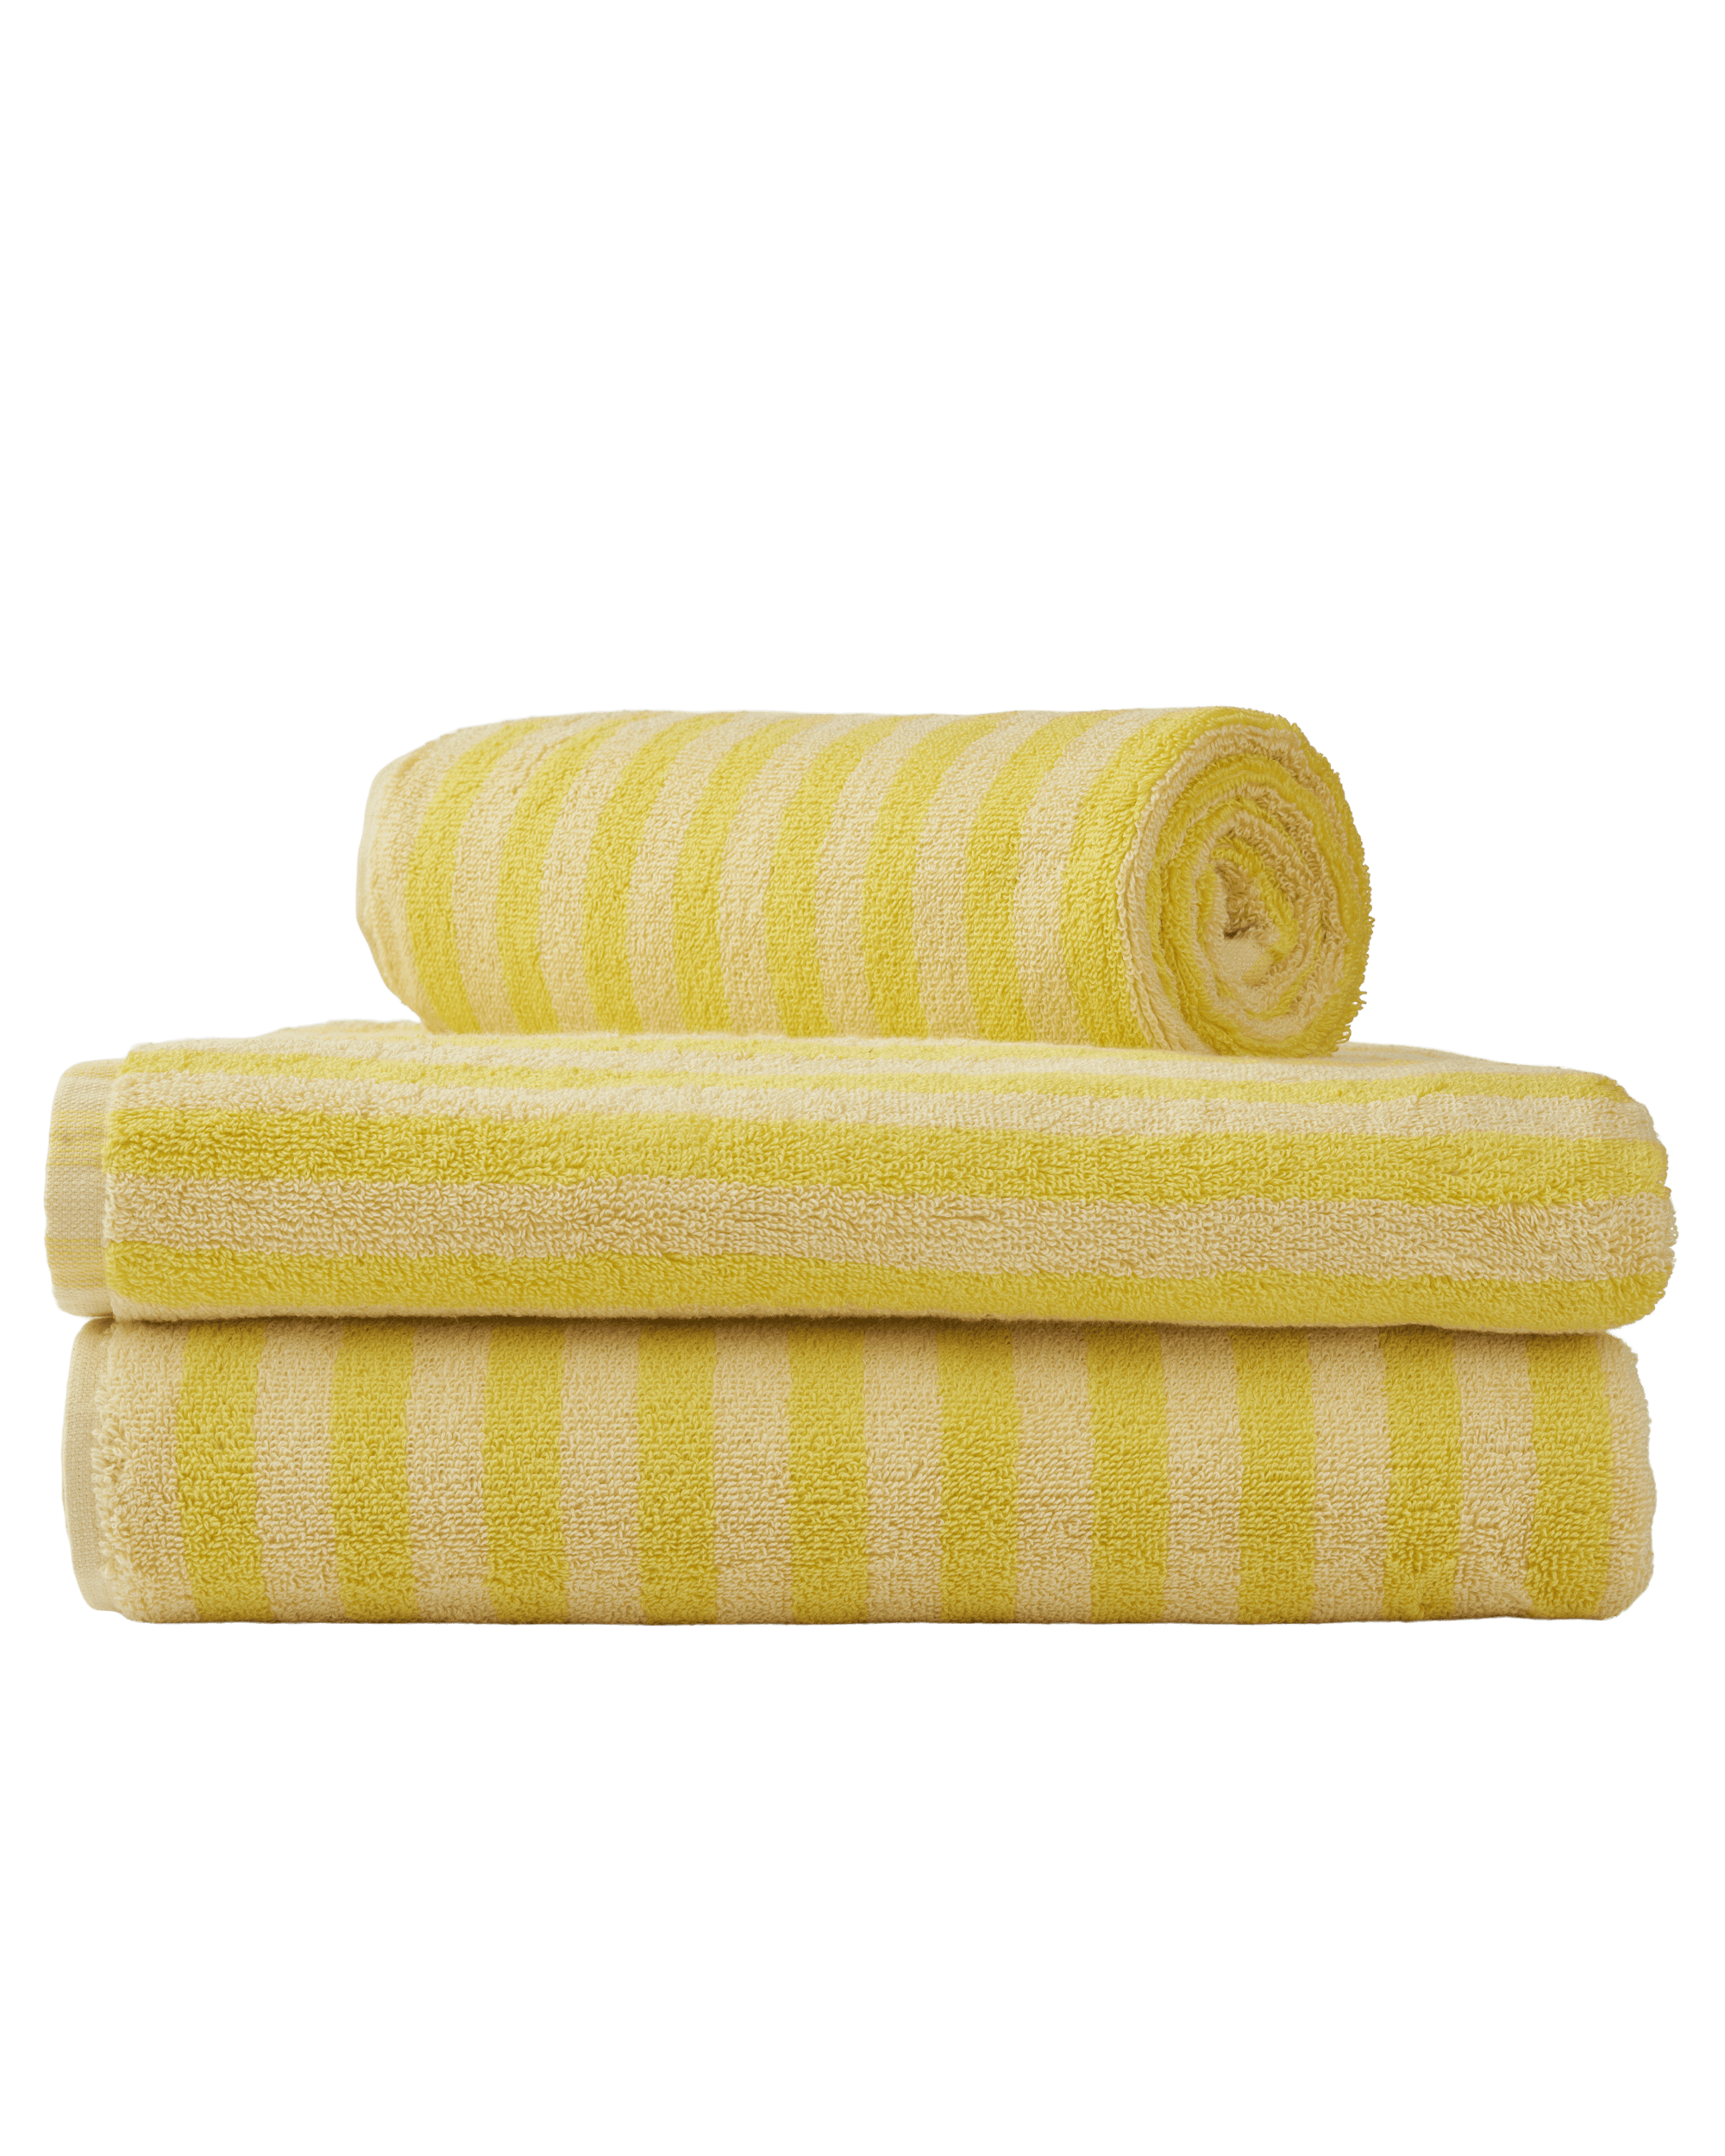 https://cdn.shopify.com/s/files/1/0590/6982/5176/products/Naramstacktowelsbabyprestine_neonyellow.png?v=1667807789